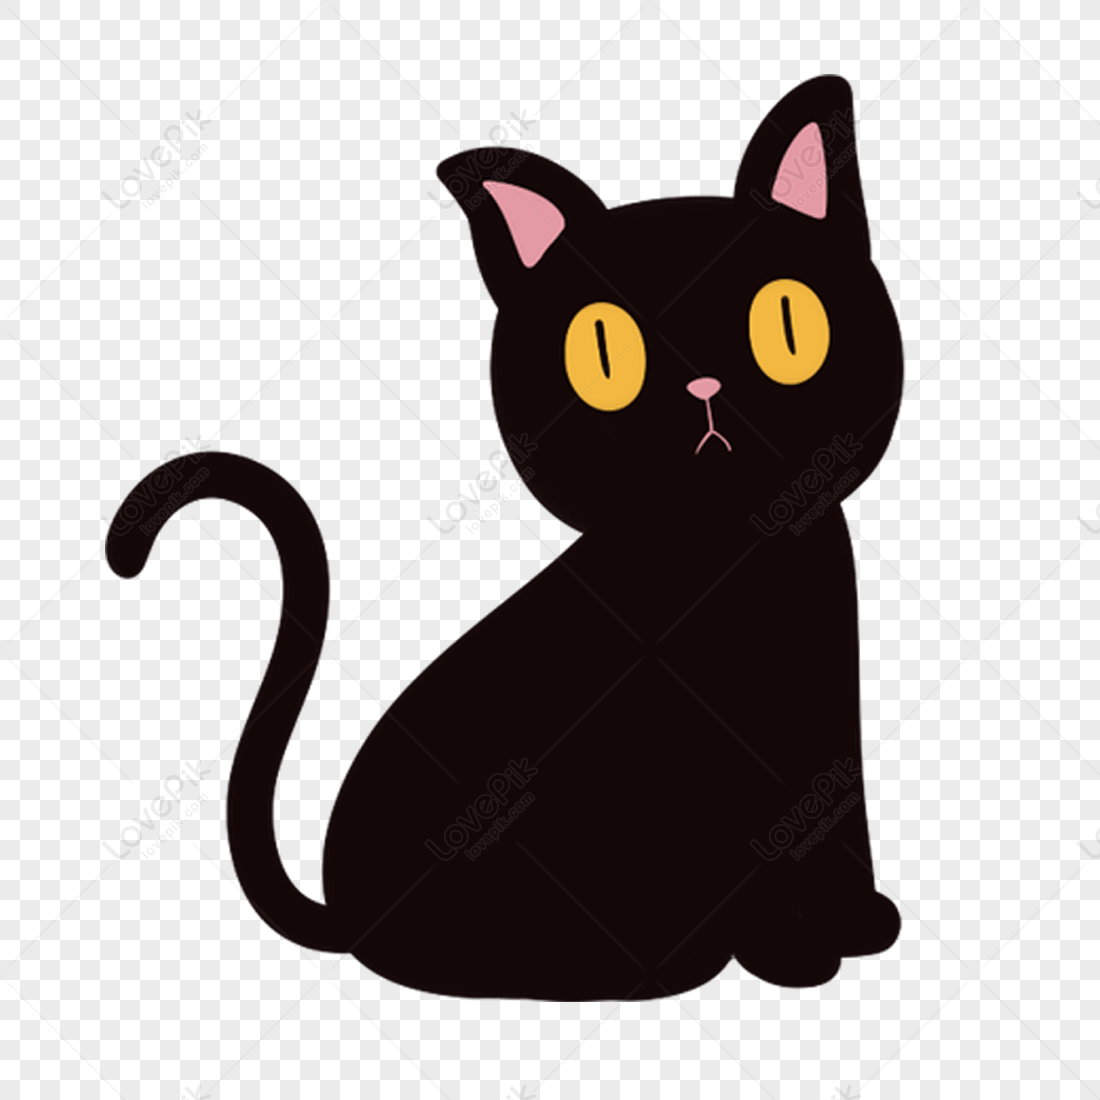 Cartoon Cat PNG Hd Transparent Image And Clipart Image For Free Download -  Lovepik | 400191554